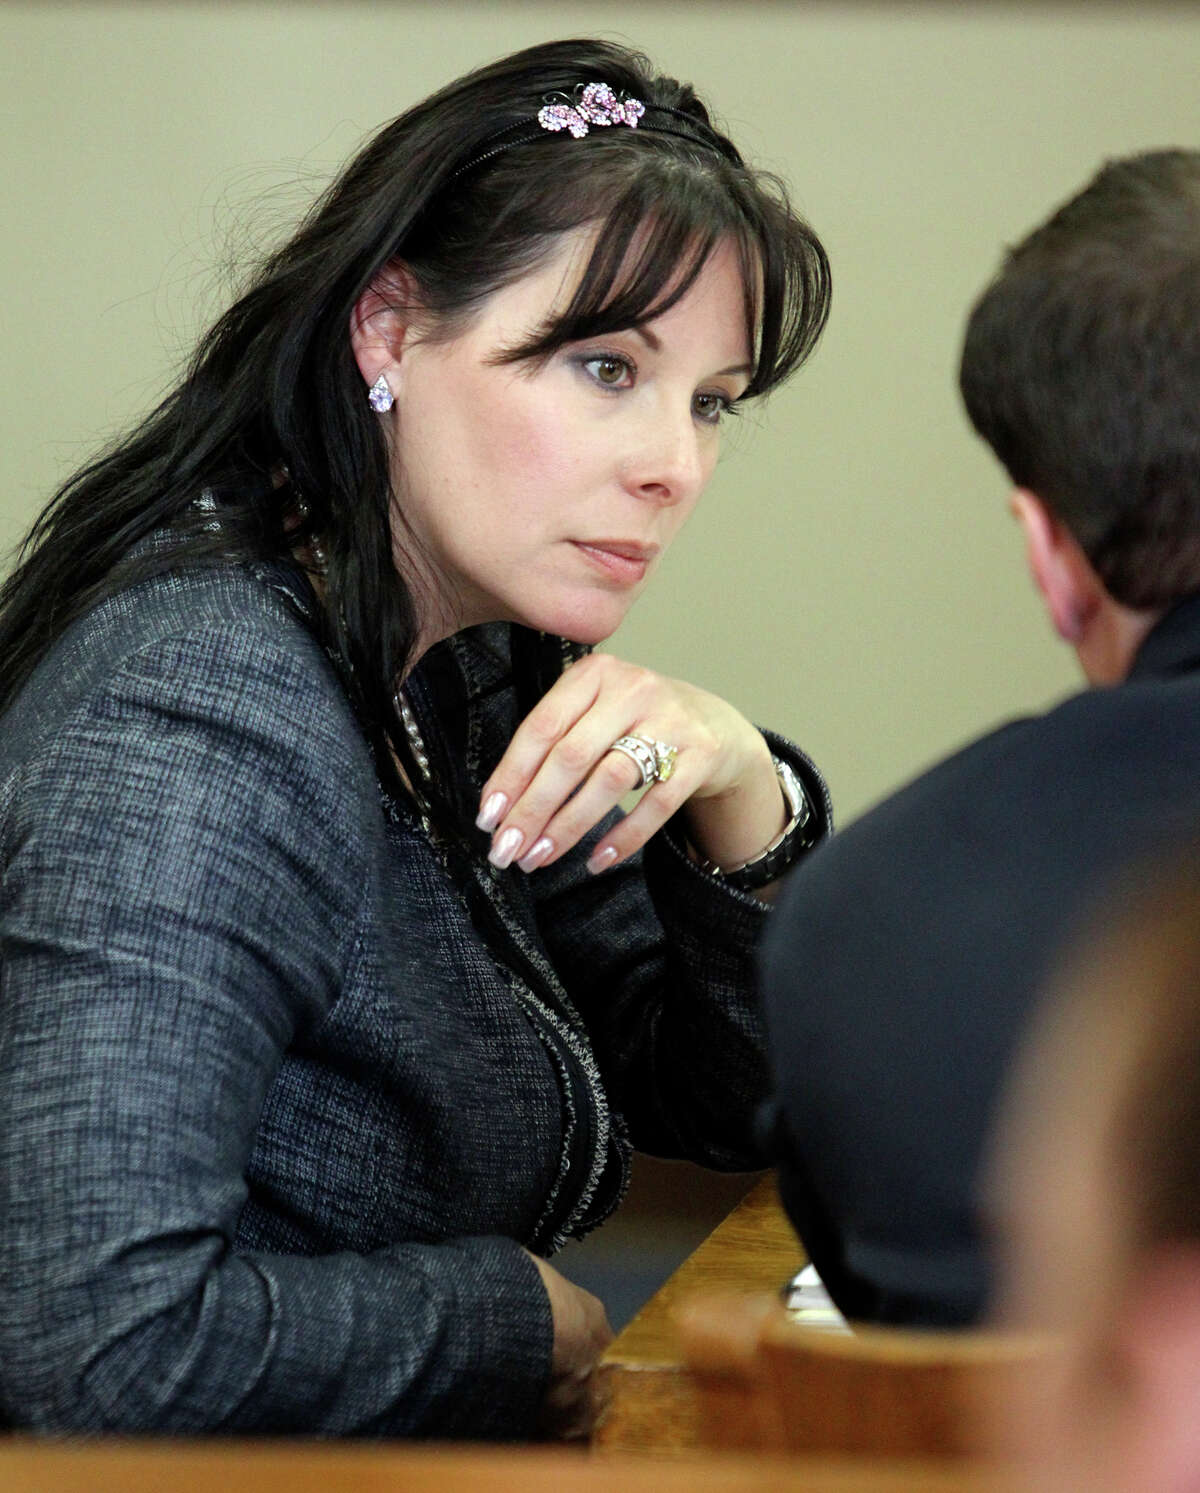 Linda Woods chats with counsel as witnesses testify in the Domonique Ramirez civil case in the 45th District courtroom at the Bexar County Courthouse.